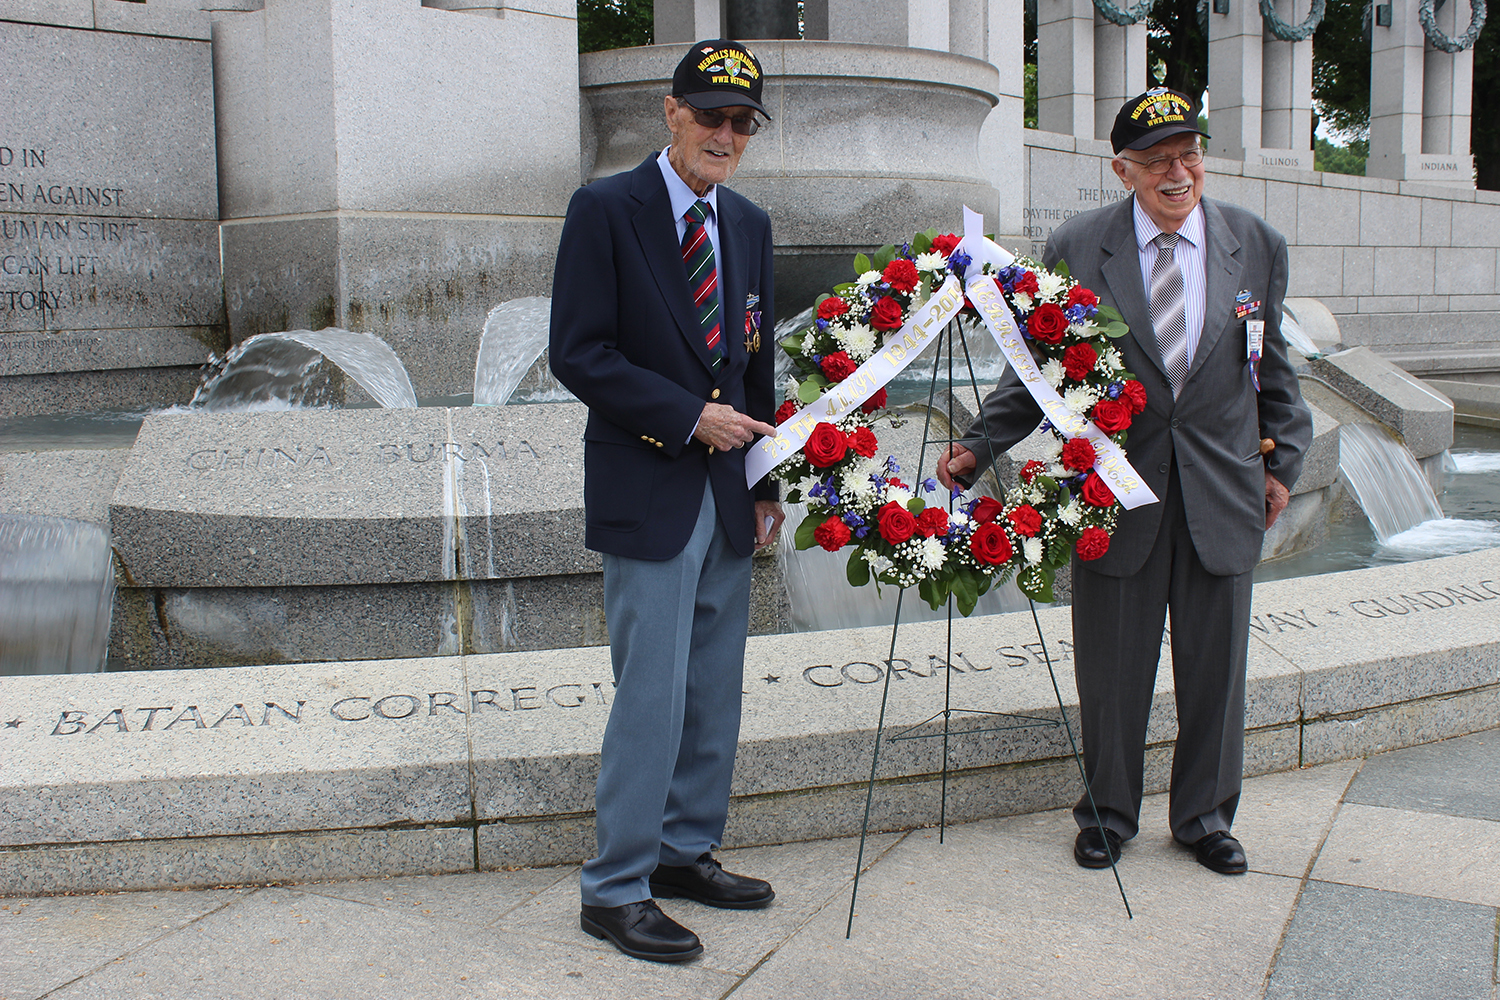 Merrill’s Marauders (L-R) Gilbert Howland, 97, and Bob Passanisi, 96, place a wreath near the China Burma India Theater monument of Washington D.C.’s WWII Memorial in 2019 during a trip to gain support for the Congressional Gold Medal. (Jonnie Melillo Clasen)